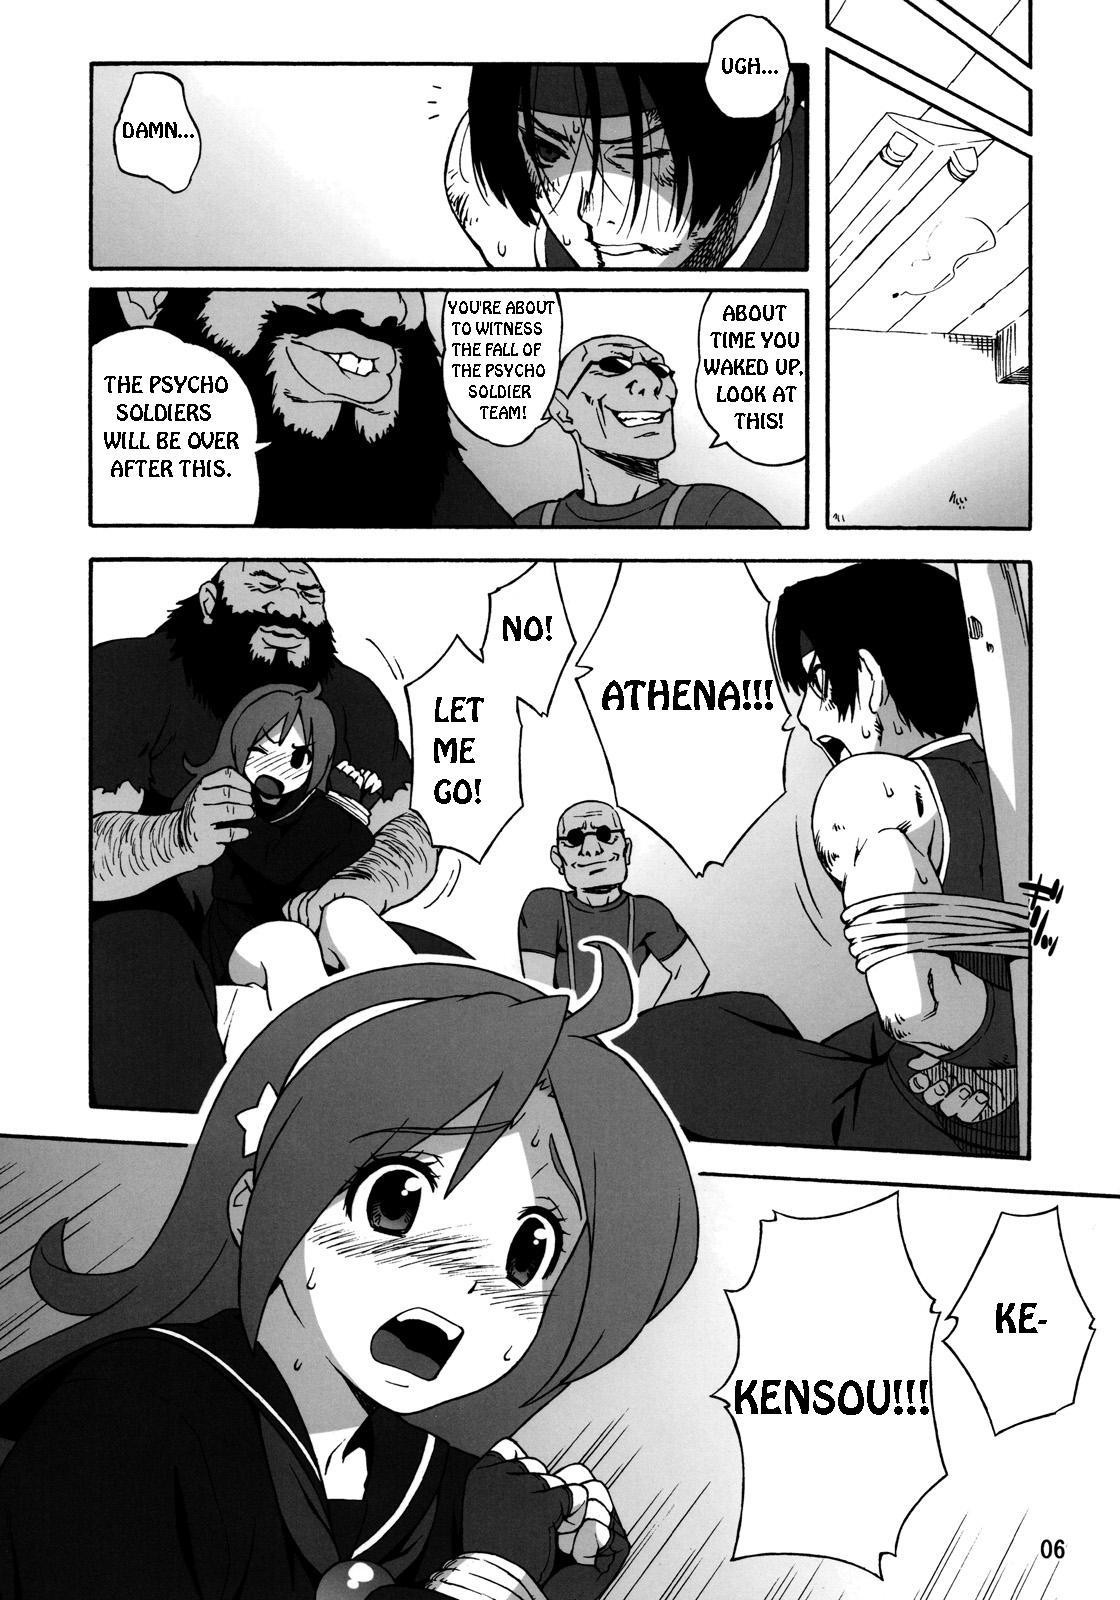 Super A.N.T.R. - King of fighters Watersports - Page 5